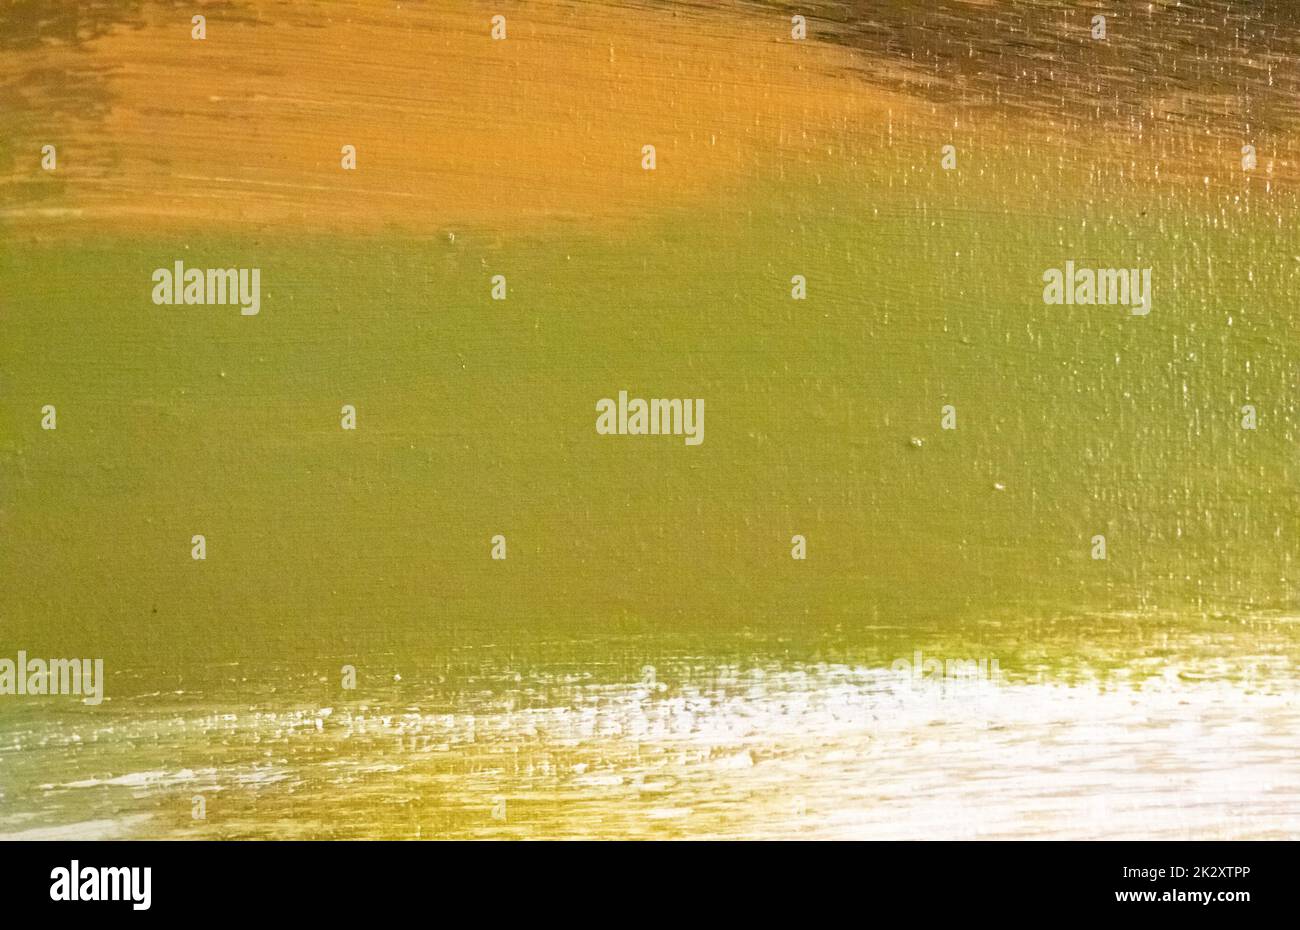 Detail of art. Brown, green and white abstract oil painted background. Oil paint texture. Abstract art background. Oil painting on canvas. Fragment of a work of art. Oil paint stains. Modern Art. Stock Photo